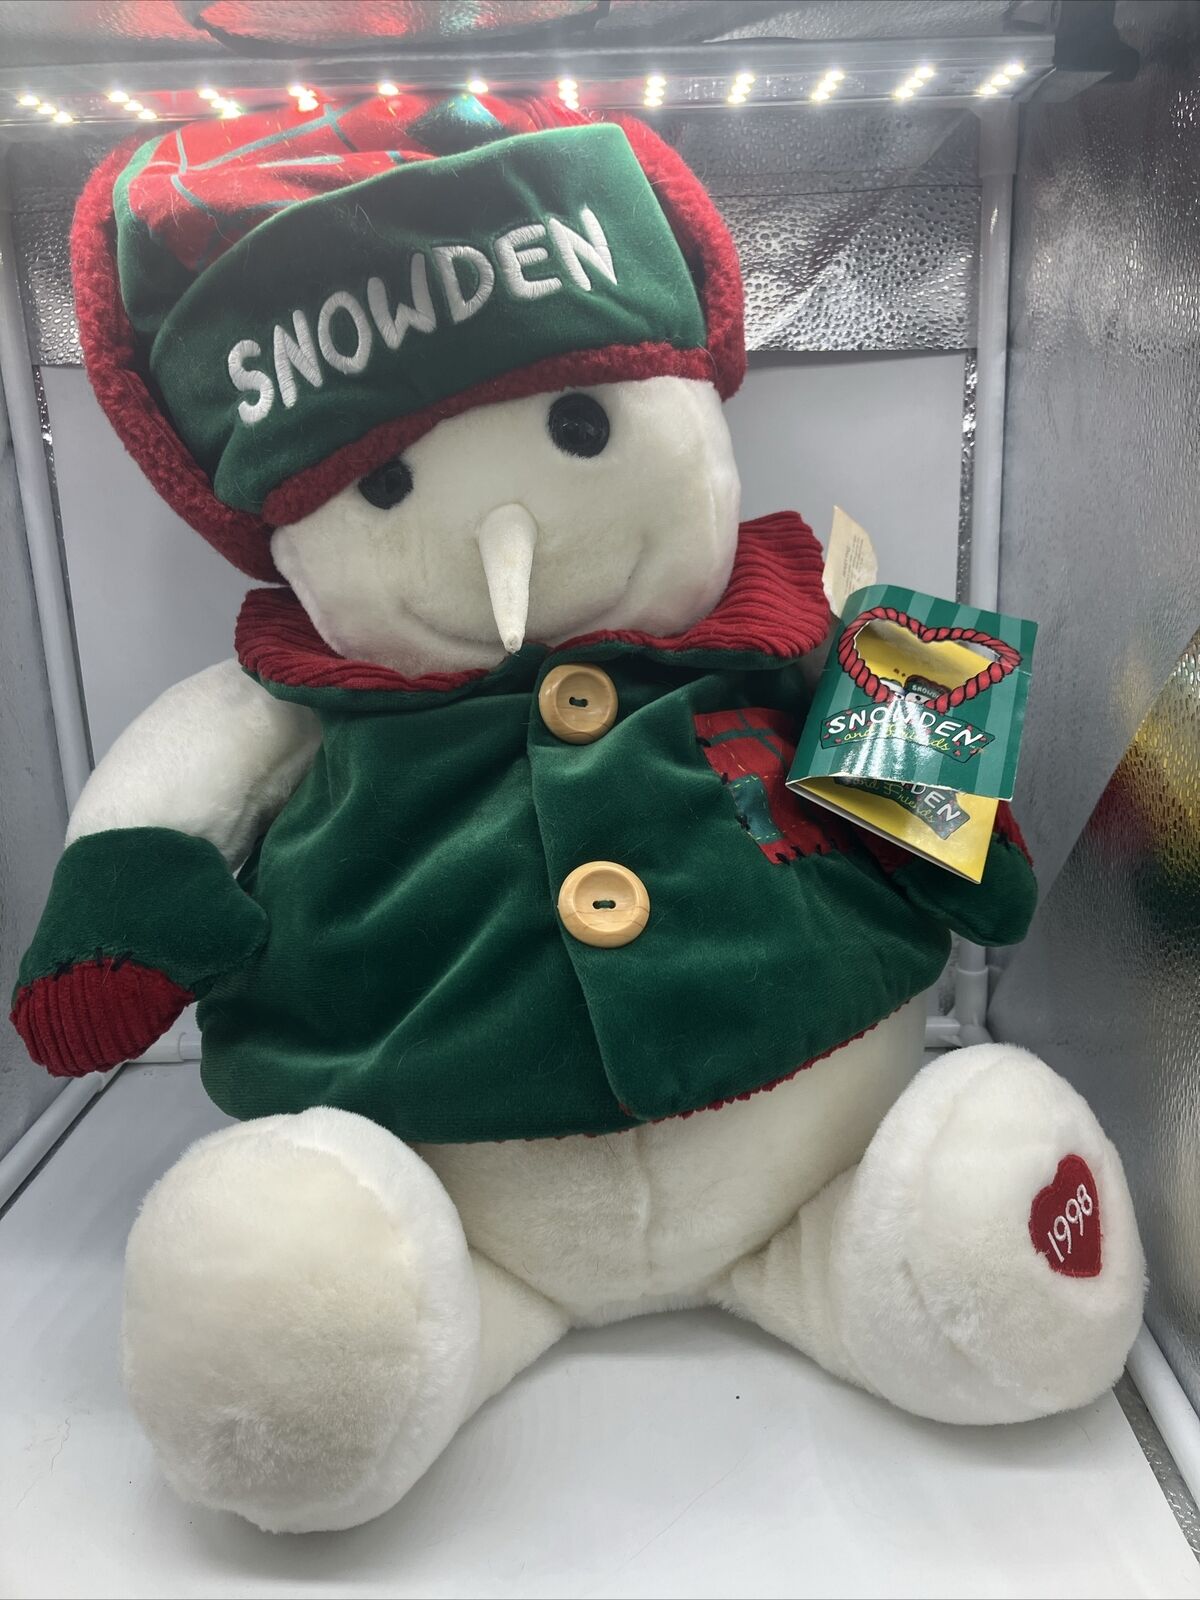 Vintage SNOWDEN and Friends 1998 Target Exclusive Christmas Snowman Plush Tags